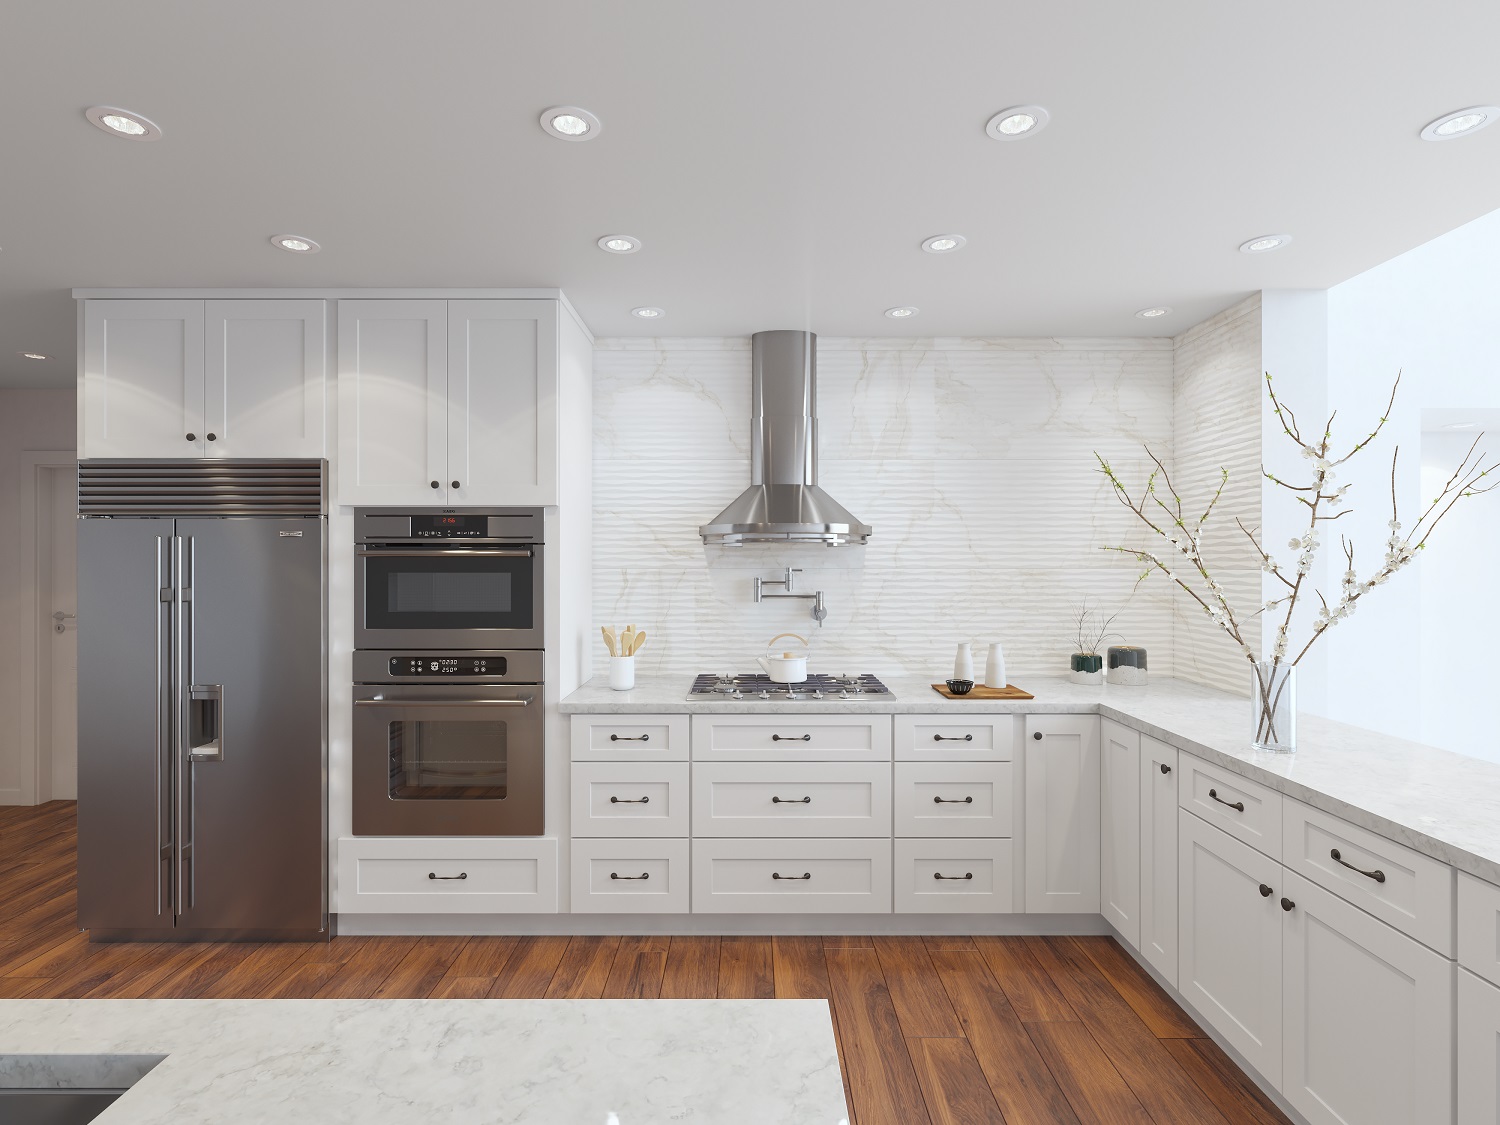 Choosing the Right Appliances for a Kitchen Remodel - The RTA Store